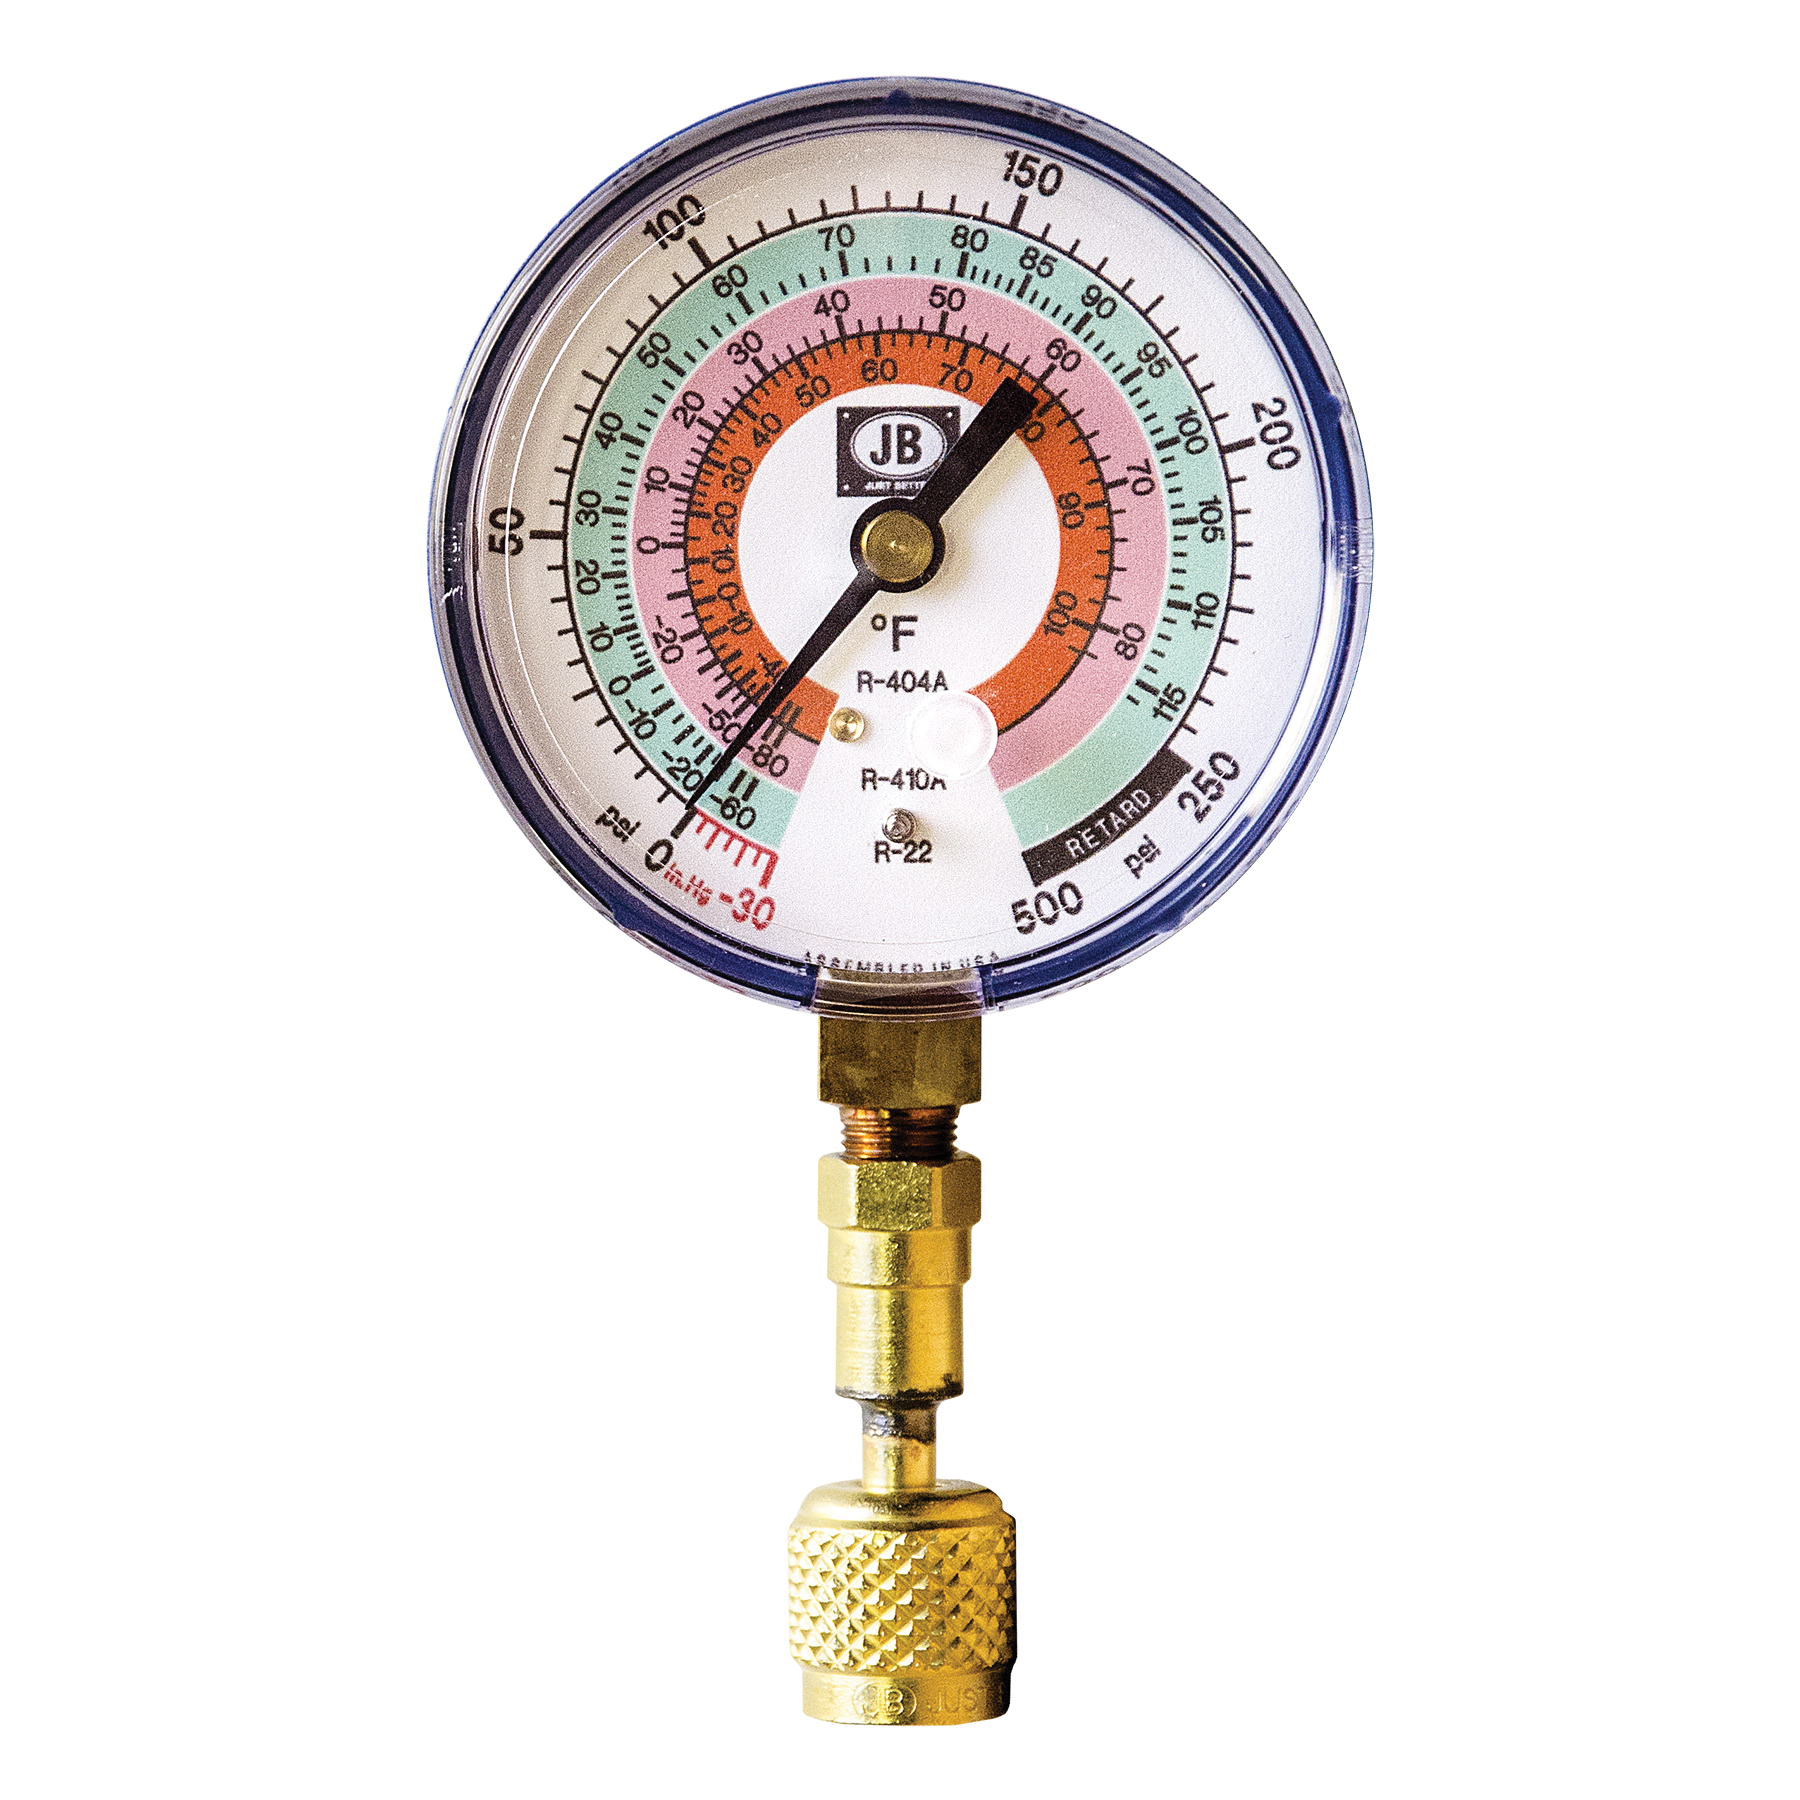 JB Industries QC-G820 Compound Single Test Gauge, 1/4 in, 500 psi